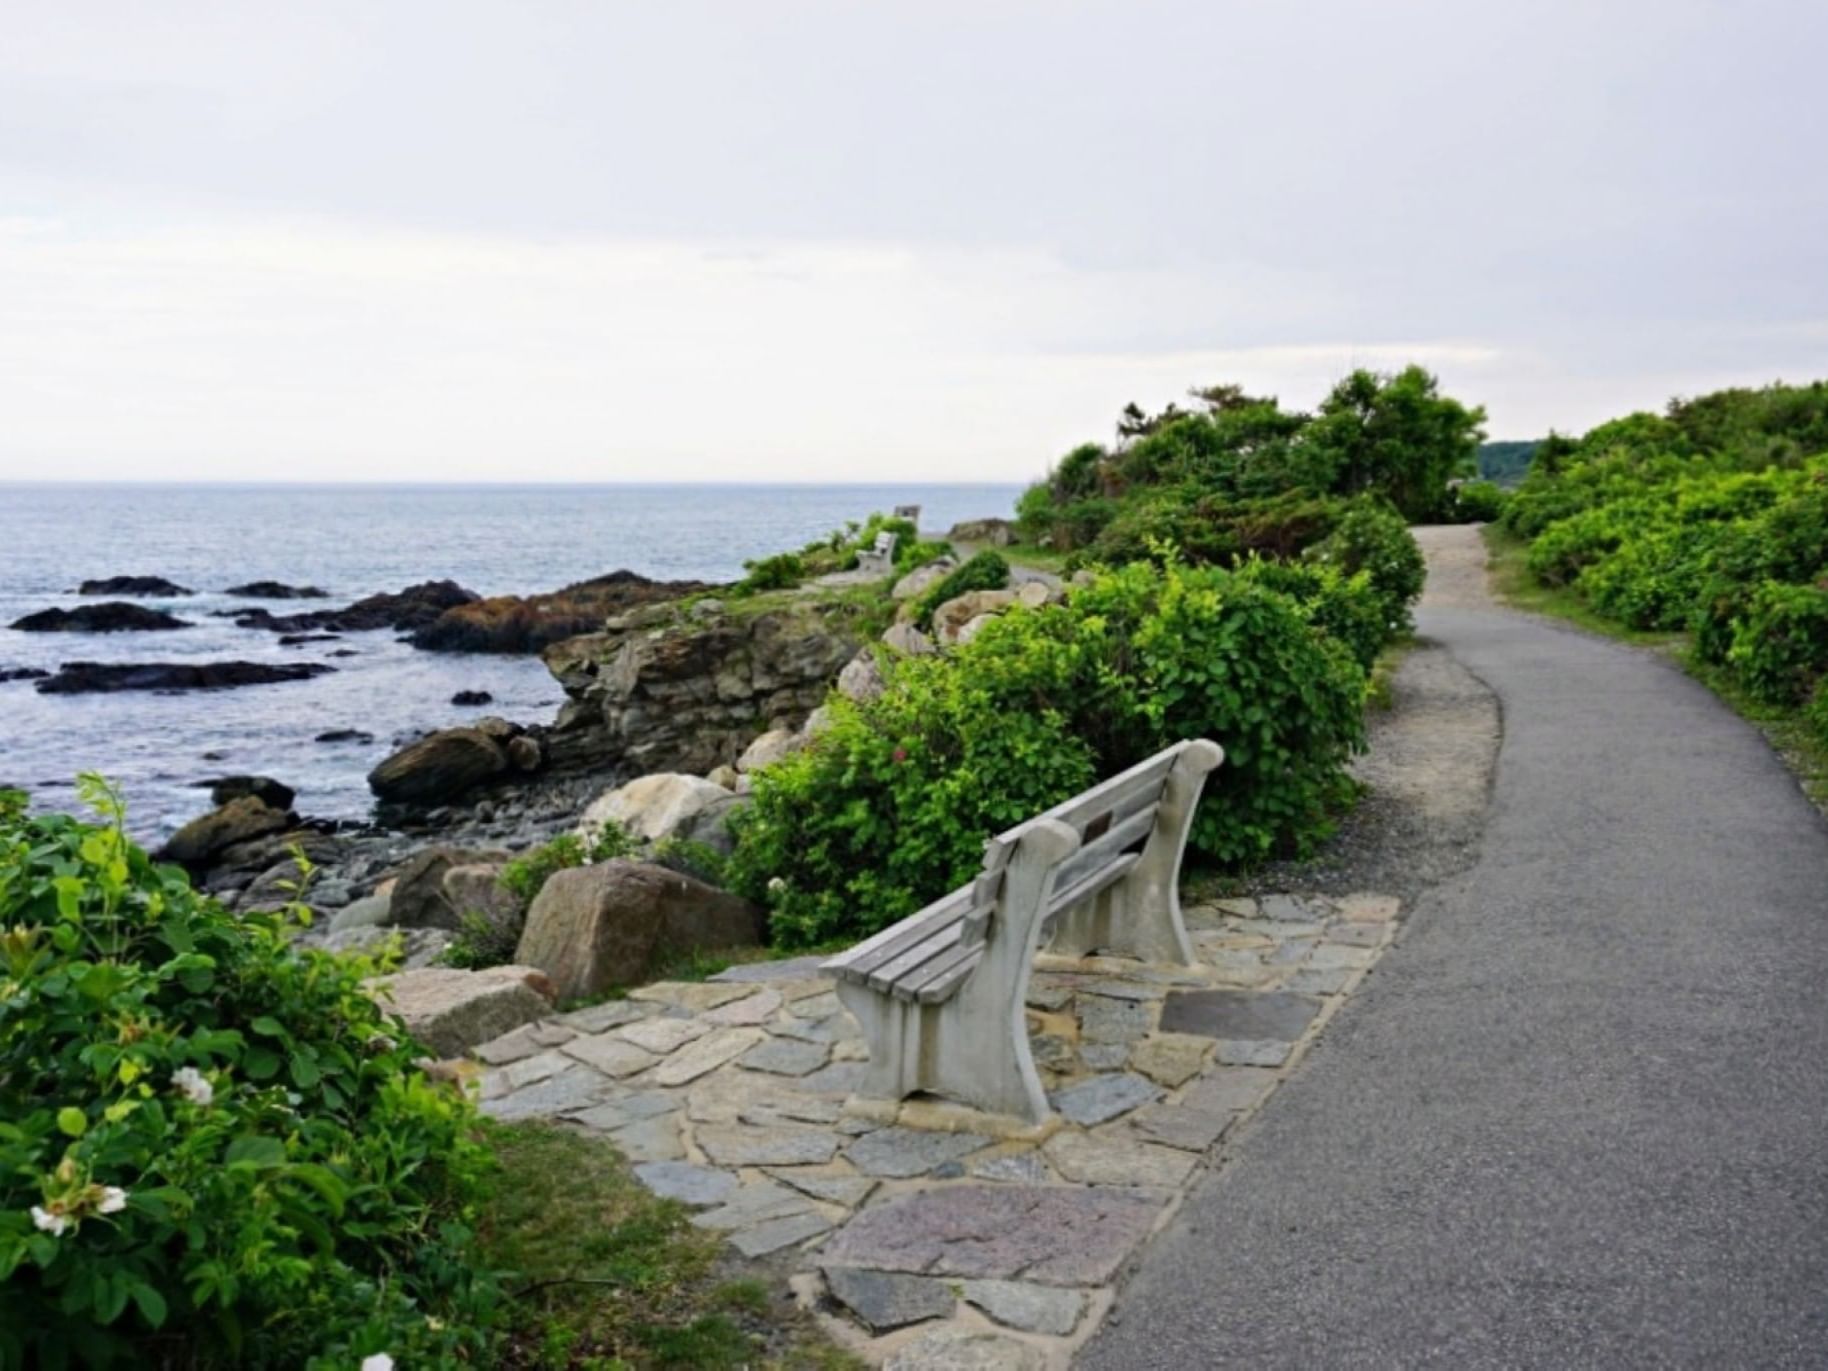 Bench by the beach with a nice cliffside view along a coastal trail in Marginal Way near Ogunquit River Inn